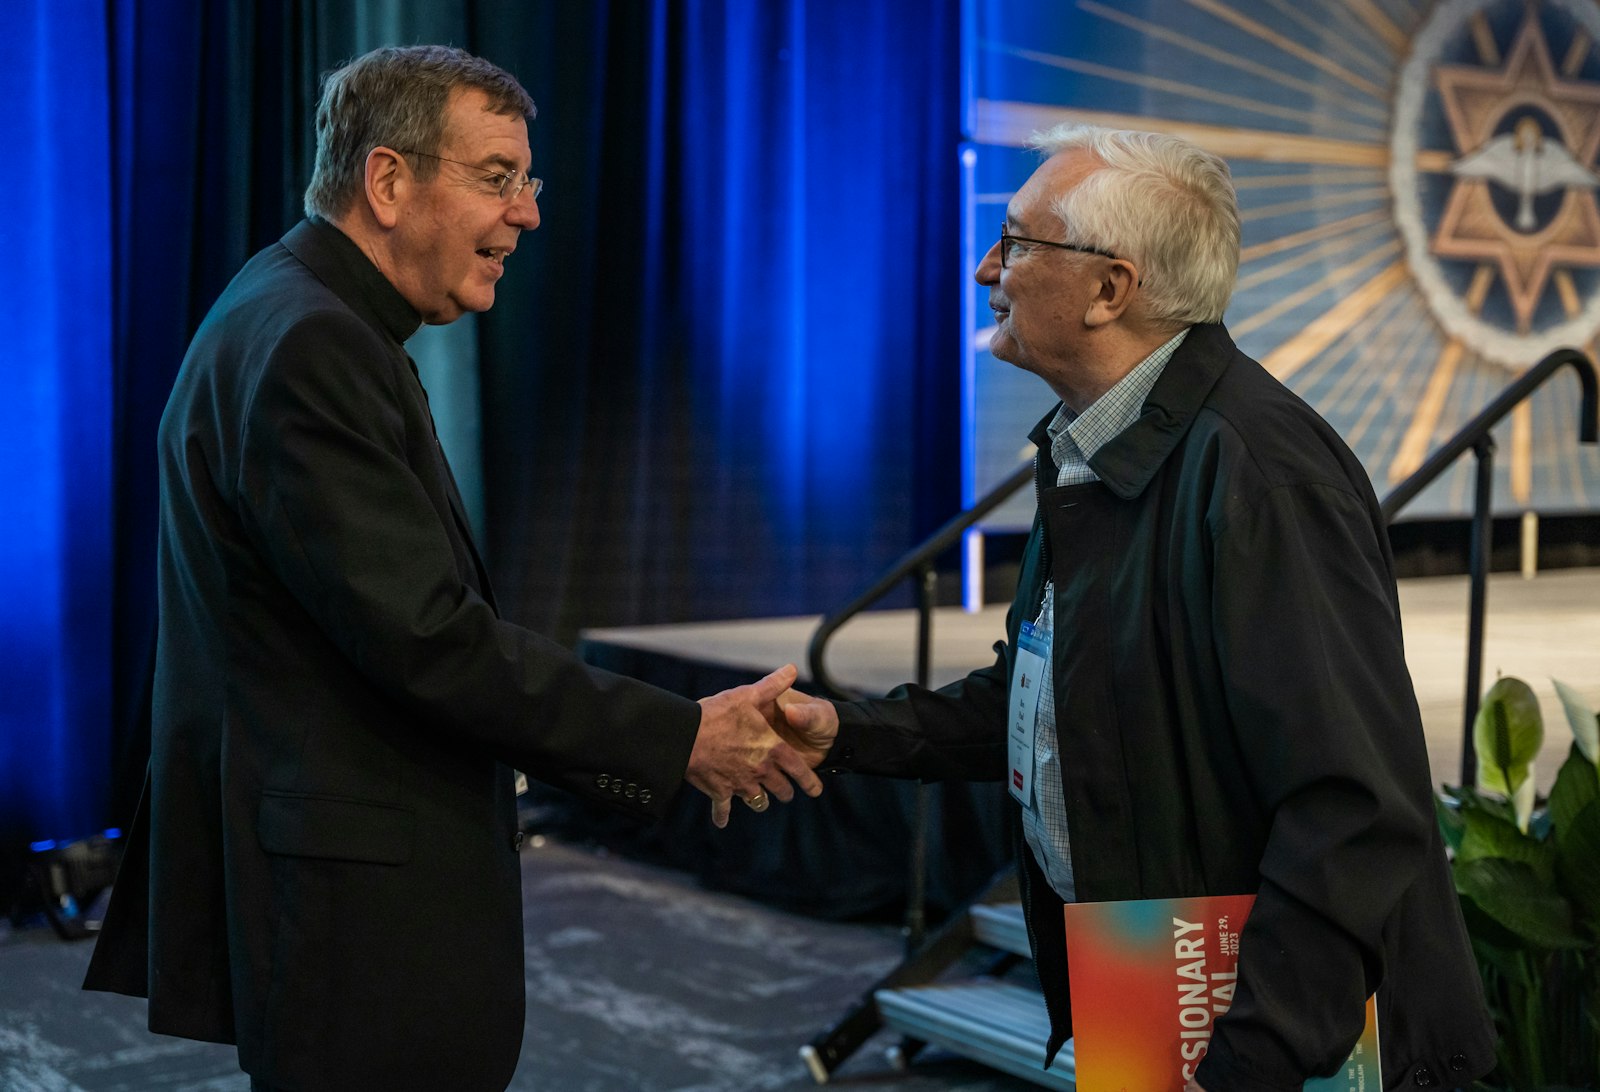 Archbishop Vigneron greets Fr. Paul Chateau of Our Mother of Perpetual Help Parish in Oak Park during the Archdiocese of Detroit's Missionary Renewal Assembly on June 29, 2023, at the Suburban Collection Showplace in Novi. (Valaurian Waller | Detroit Catholic)